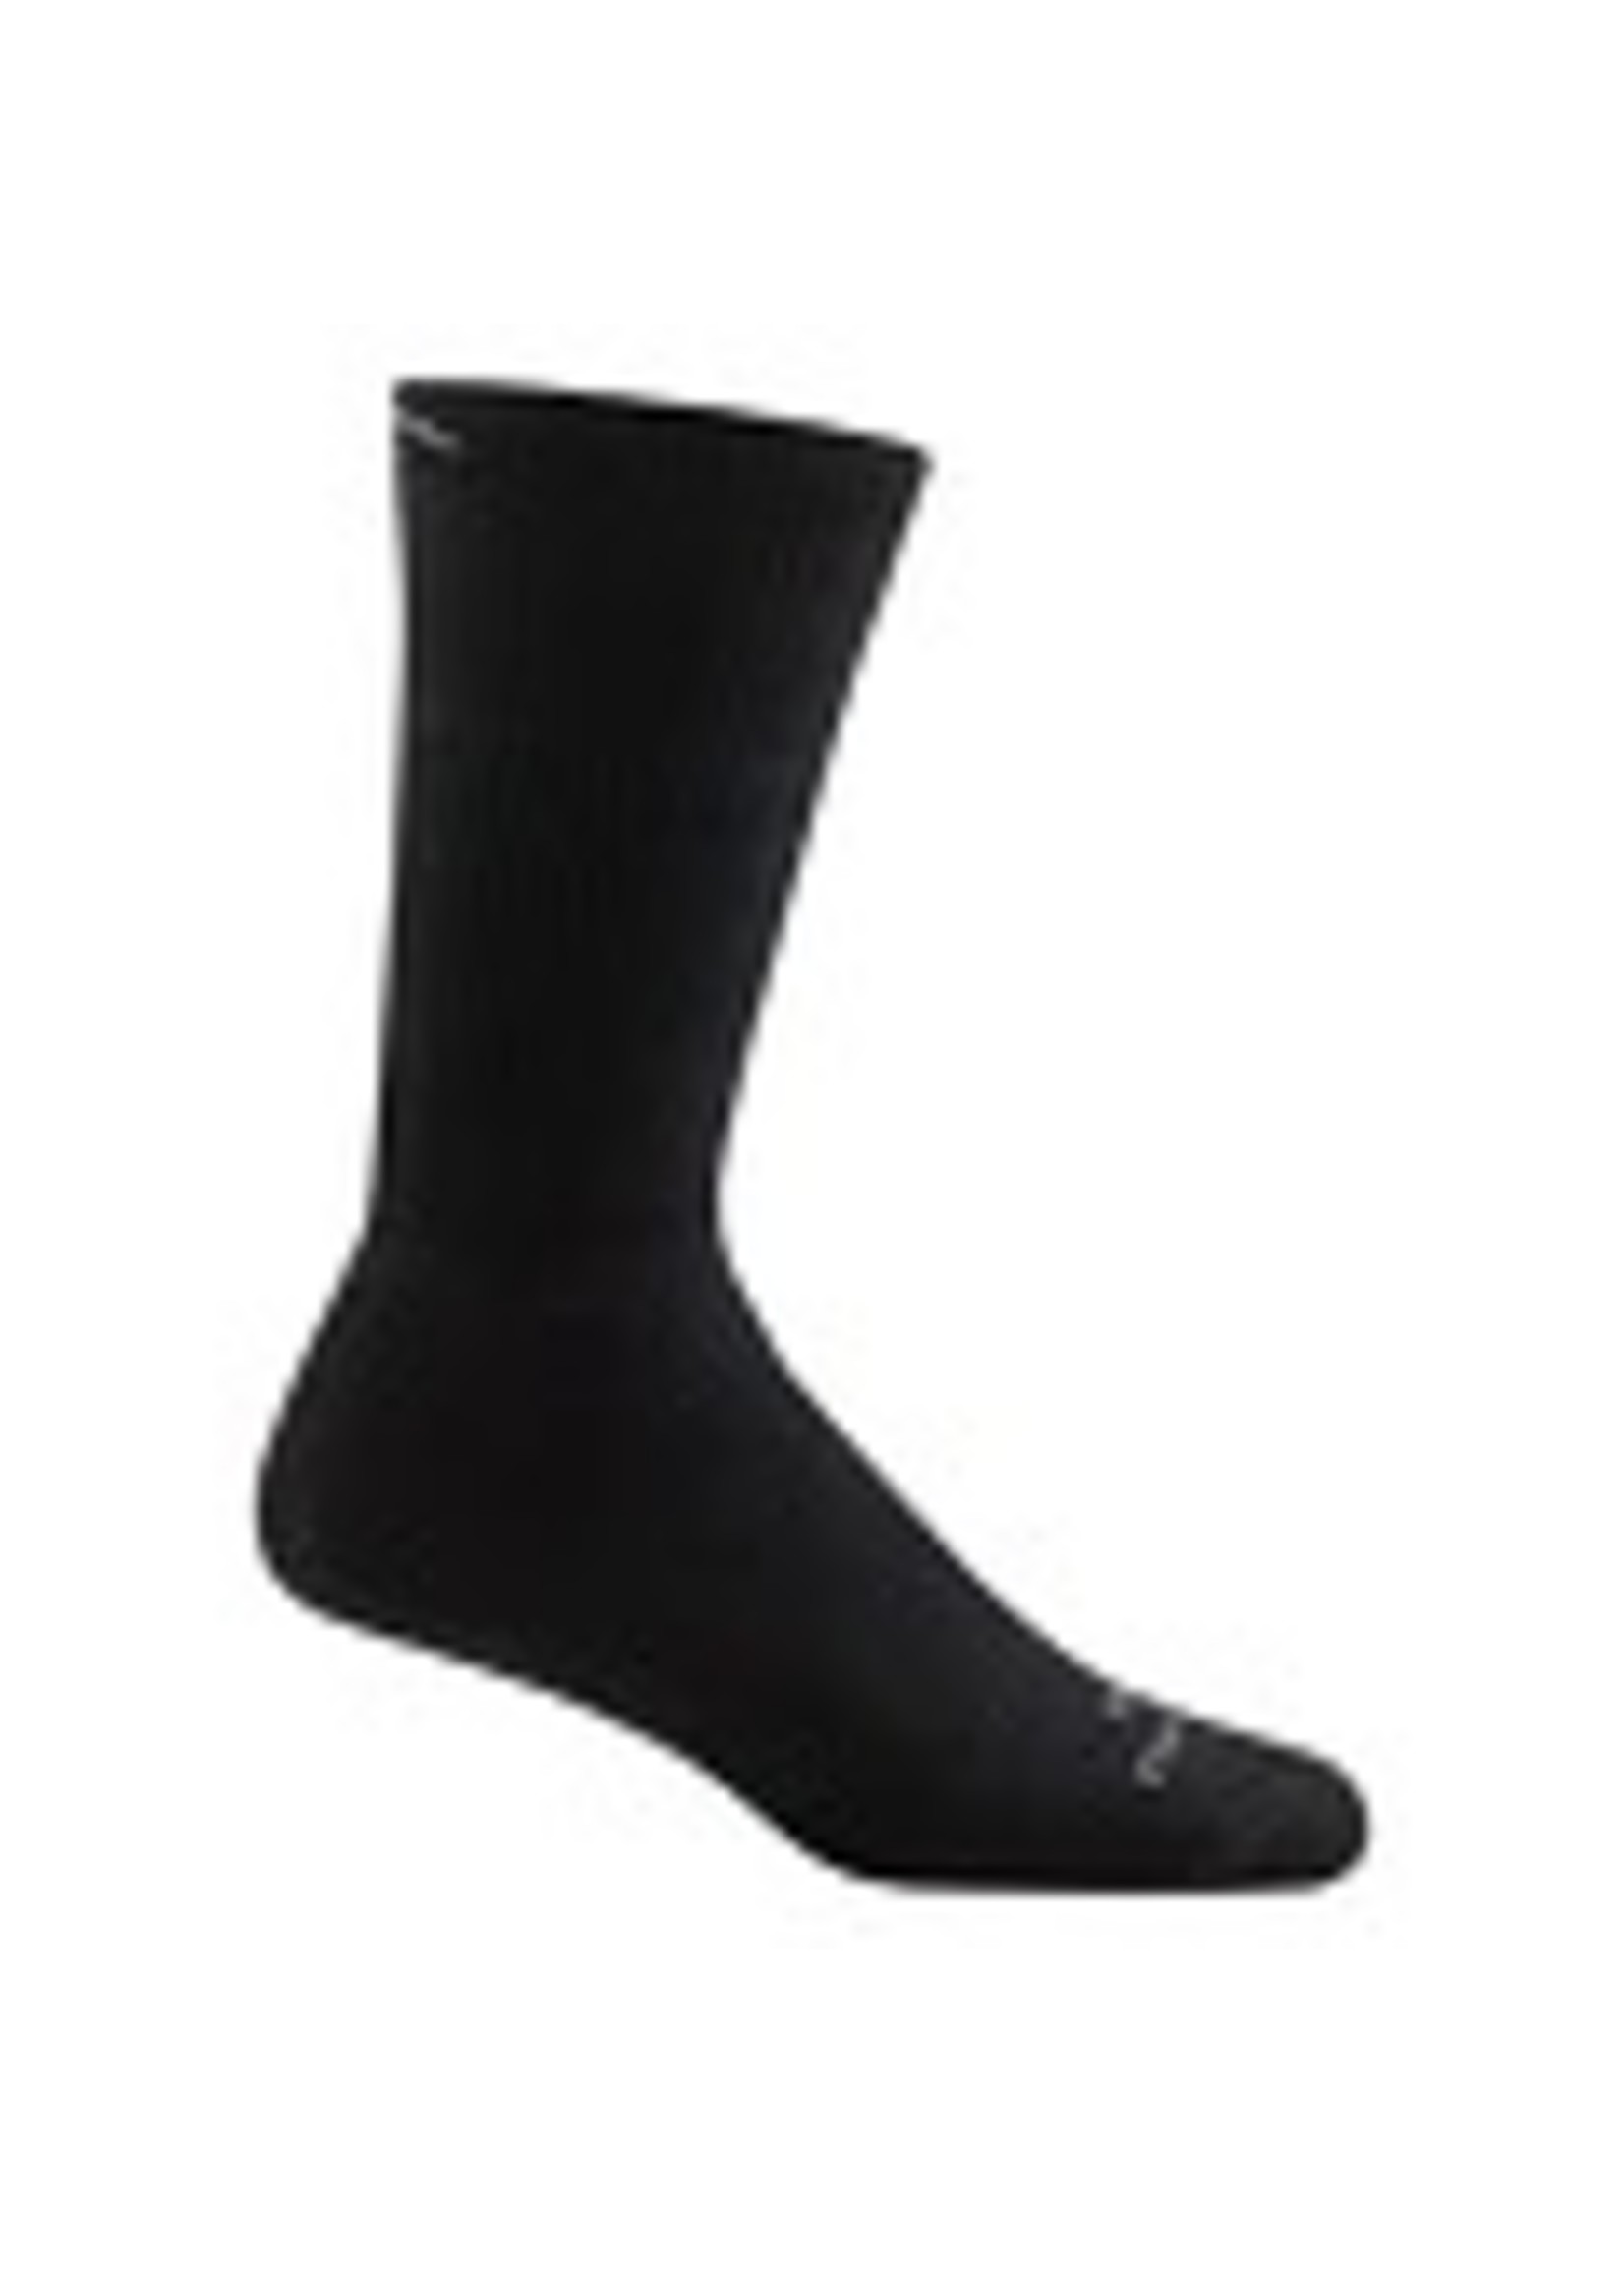 Darn Tough Boot Sock Midweight Tactical with Full Cushion